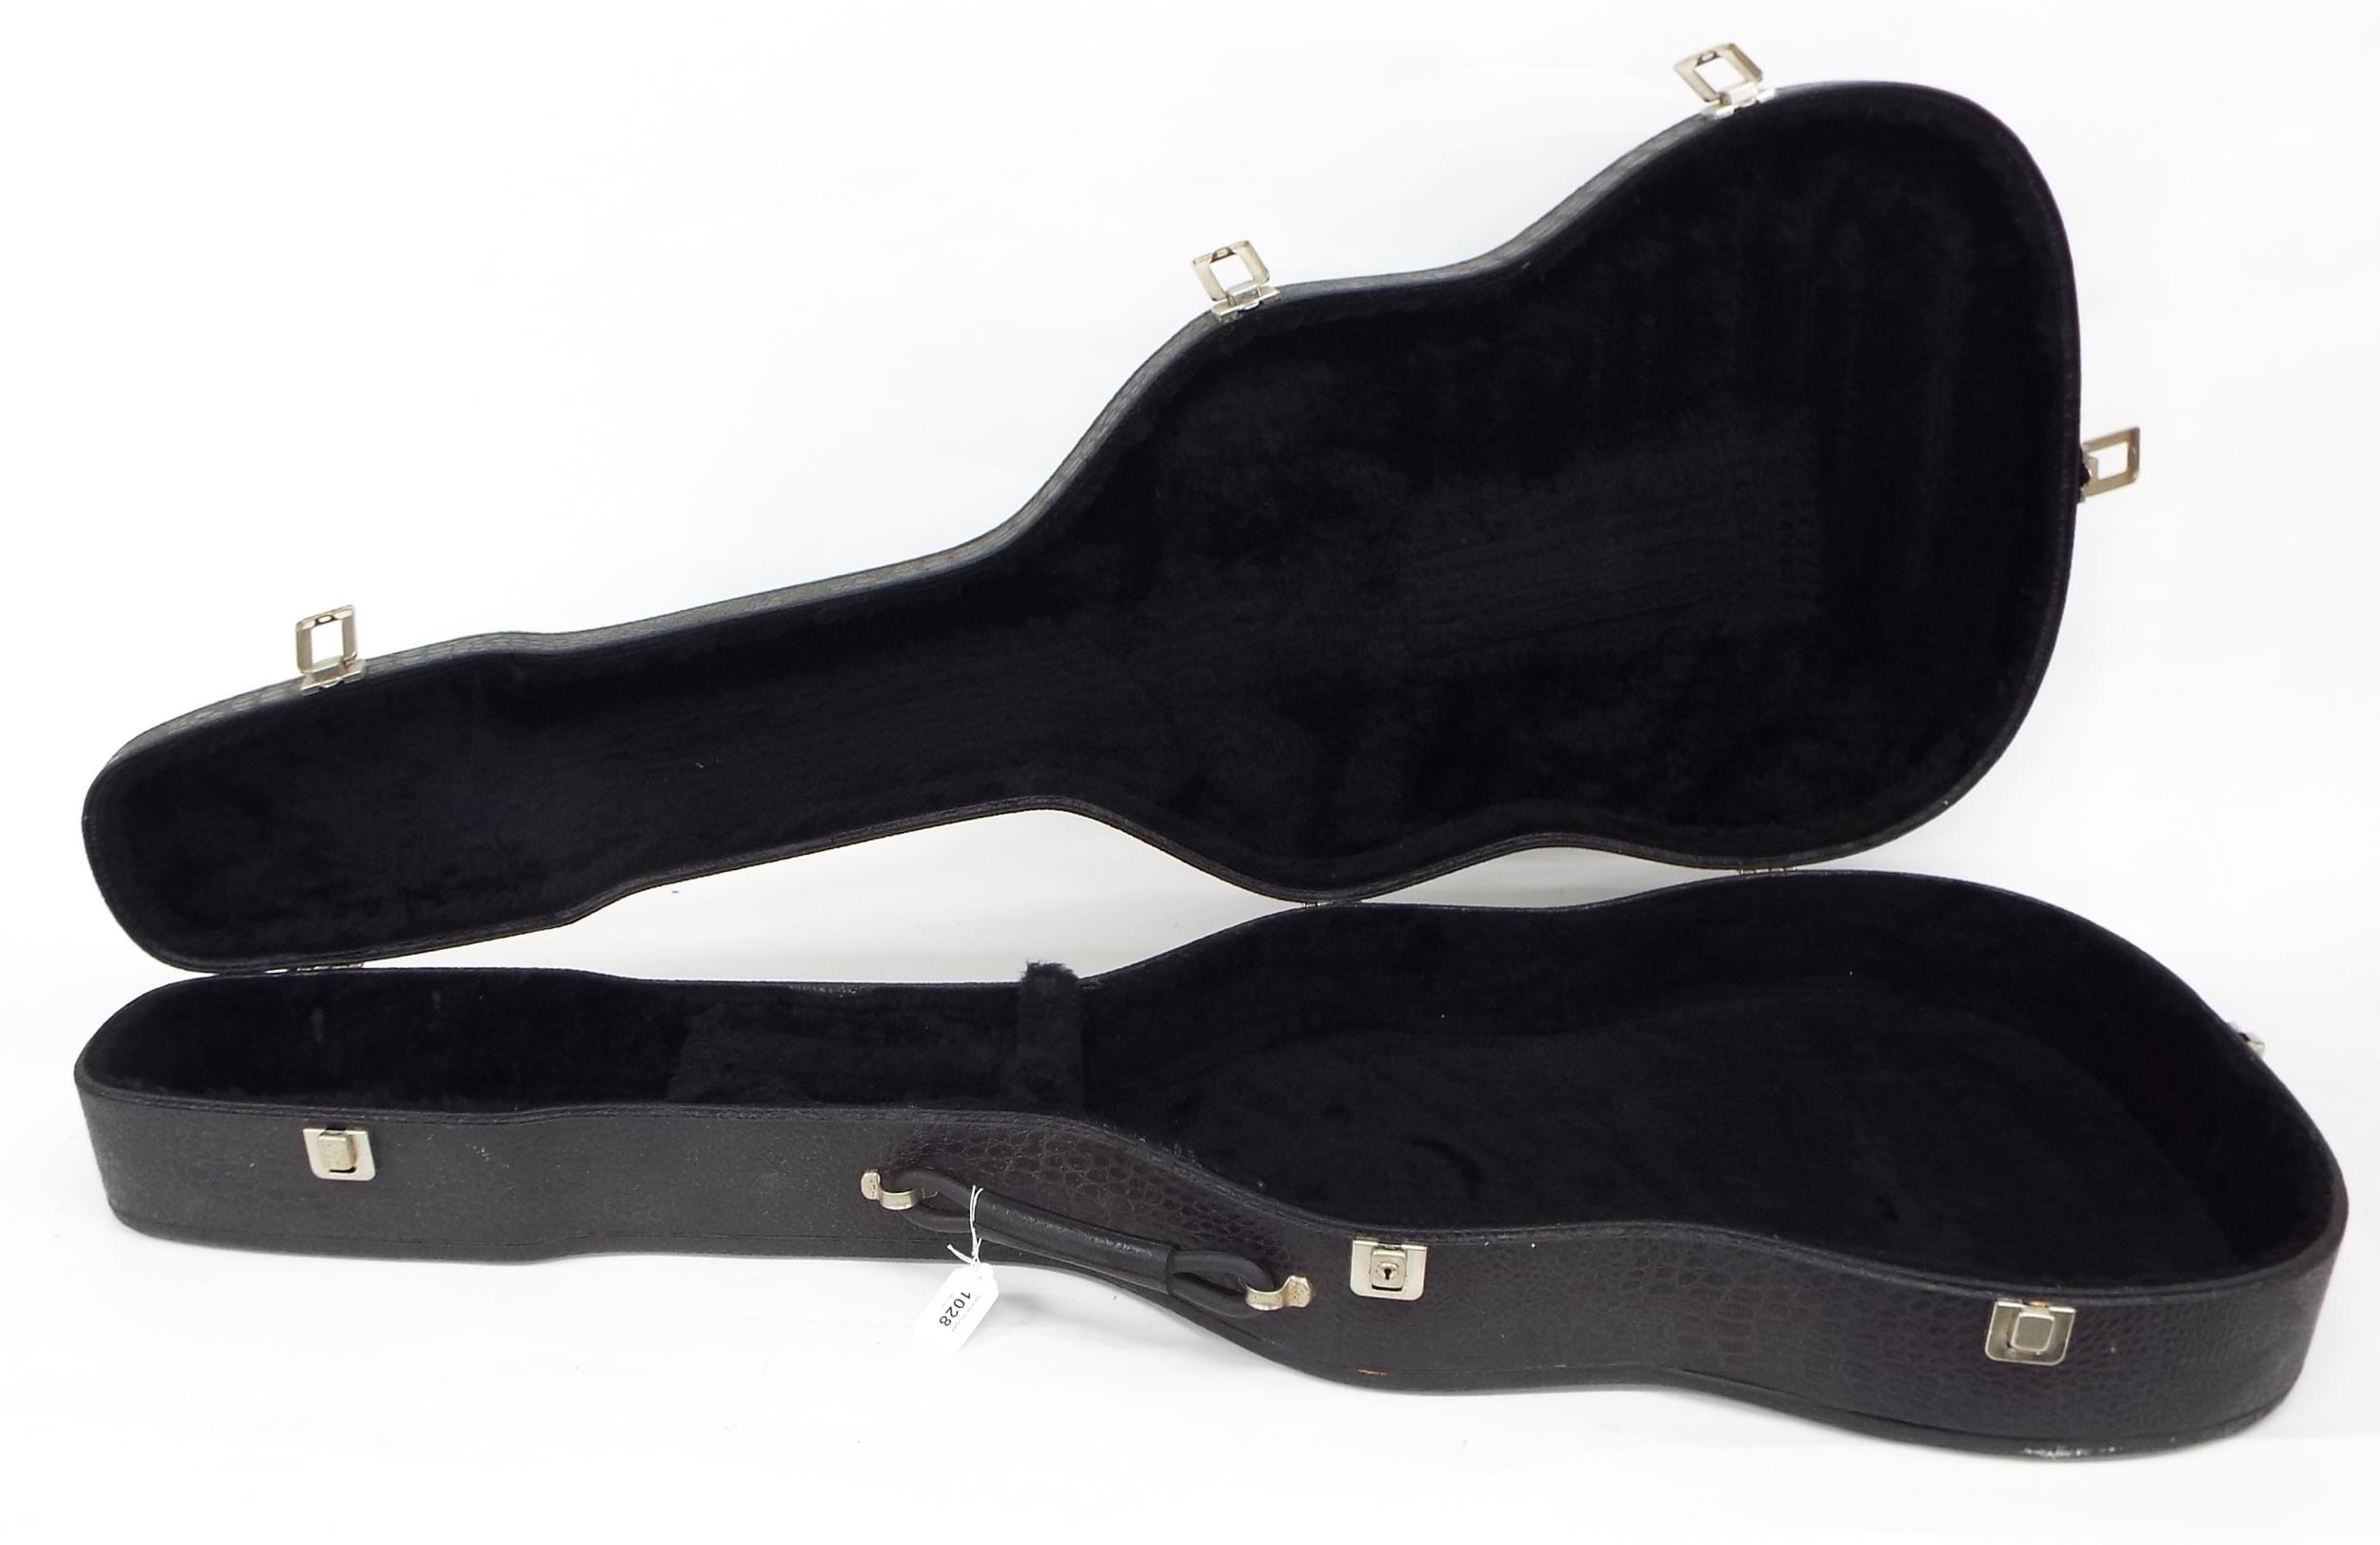 Thinline electric guitar hard case suitable for a 16" lower bout approx guitar, 3" deep